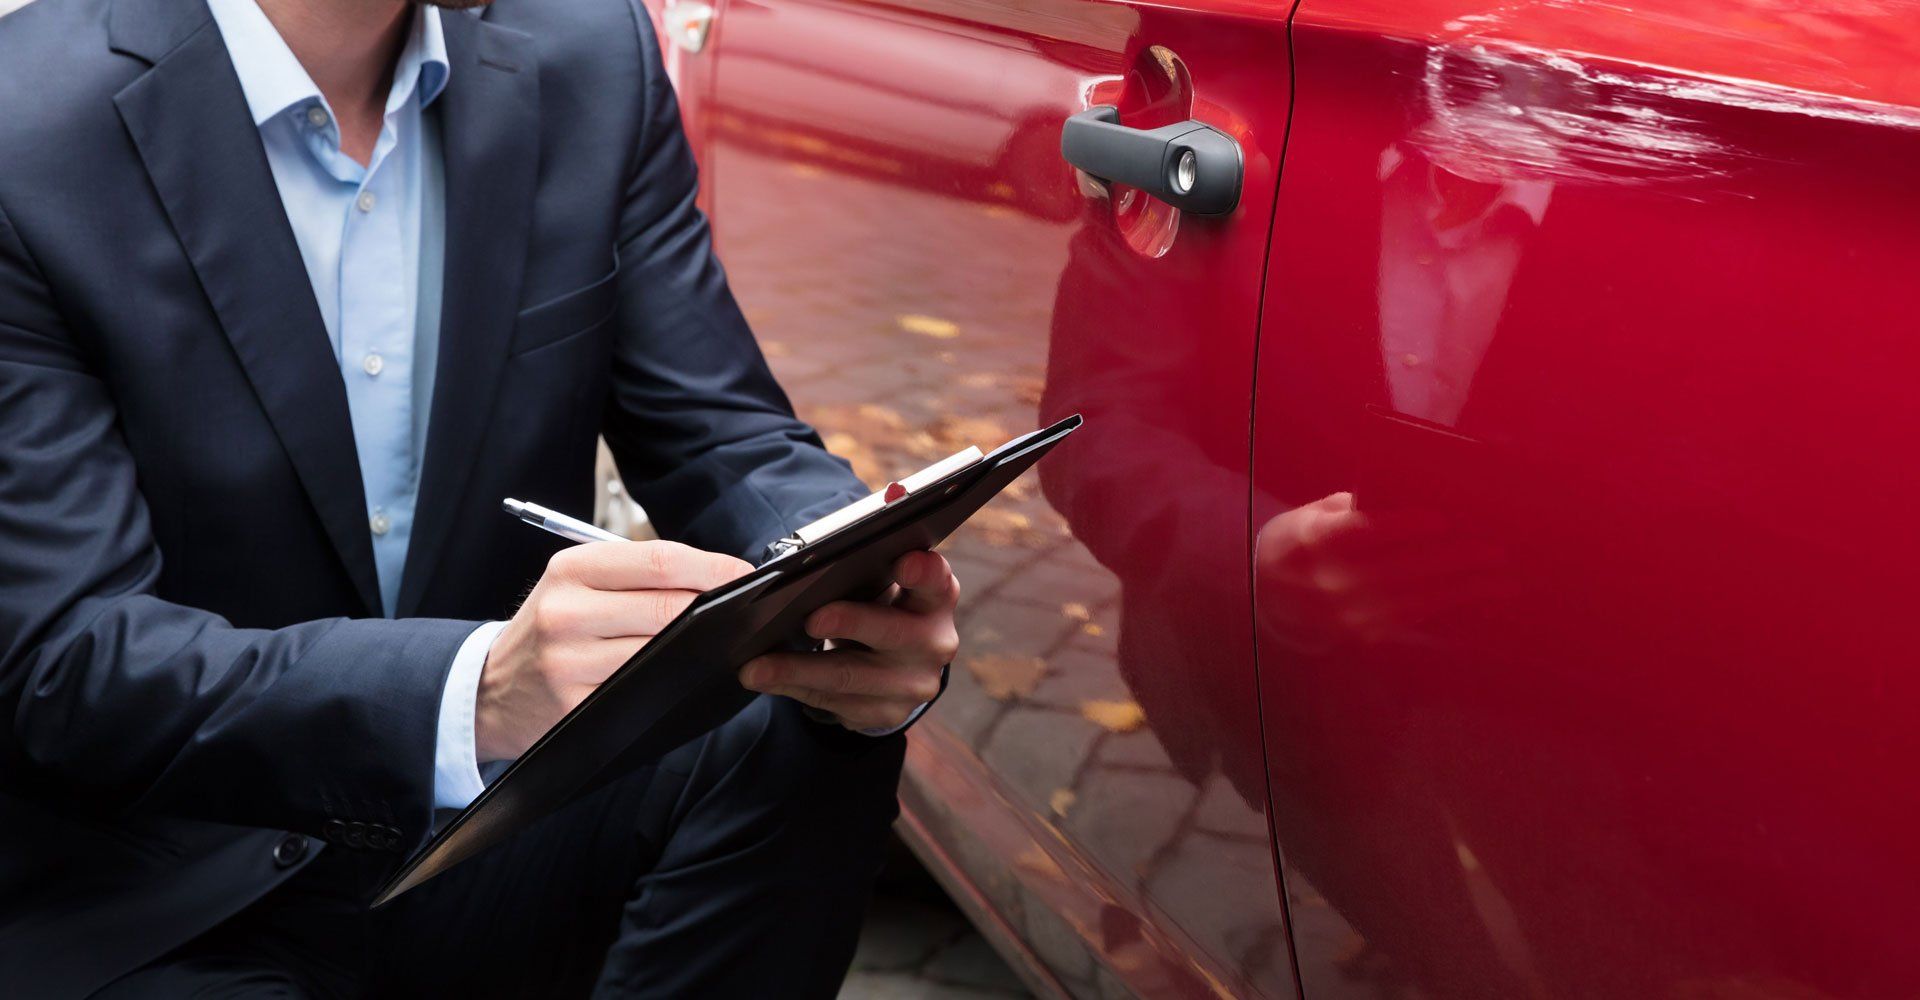 Insurance Agent Writing On Clipboard While Examining Car After Accident